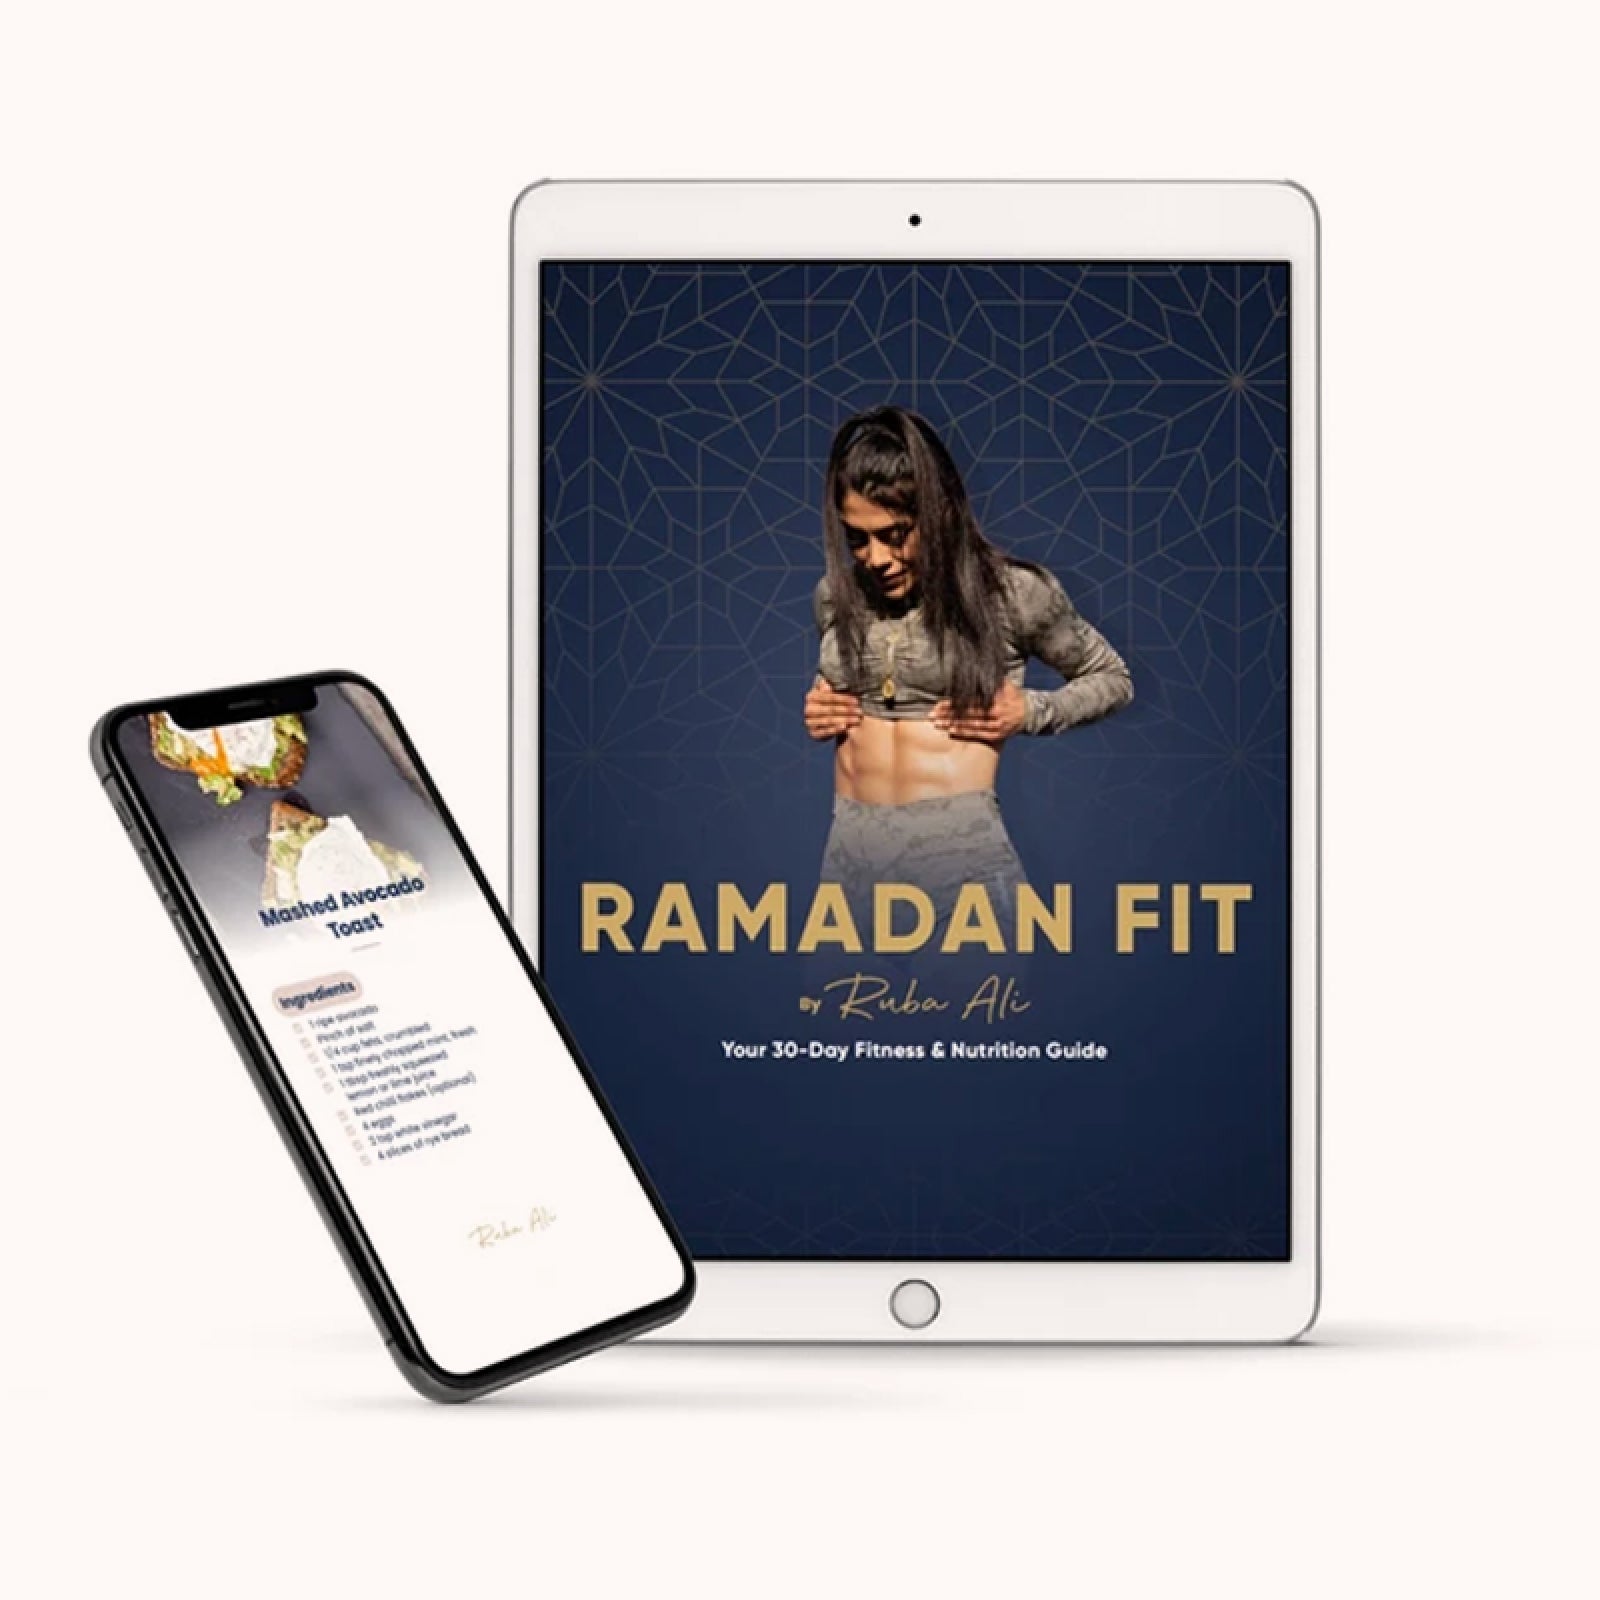 Ramadan Fit: Your 30-Day Fitness & Nutrition Guide